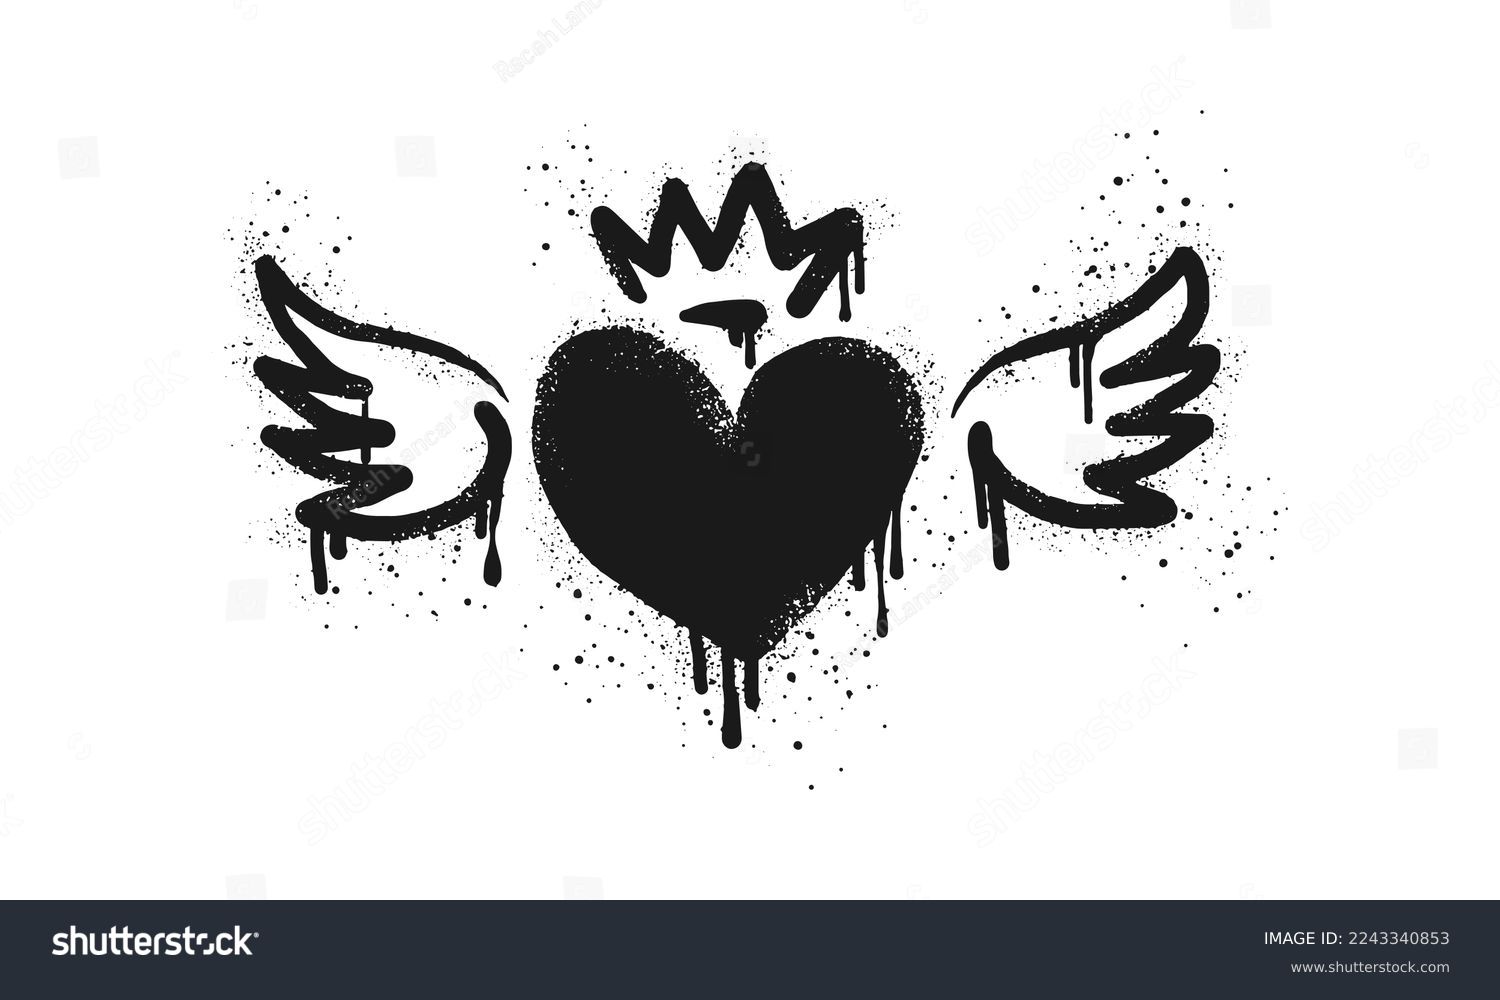 SVG of Spray painted graffiti flying heart with wings icon in black over white. Heart with wings drip symbol. isolated on white background. vector illustration svg